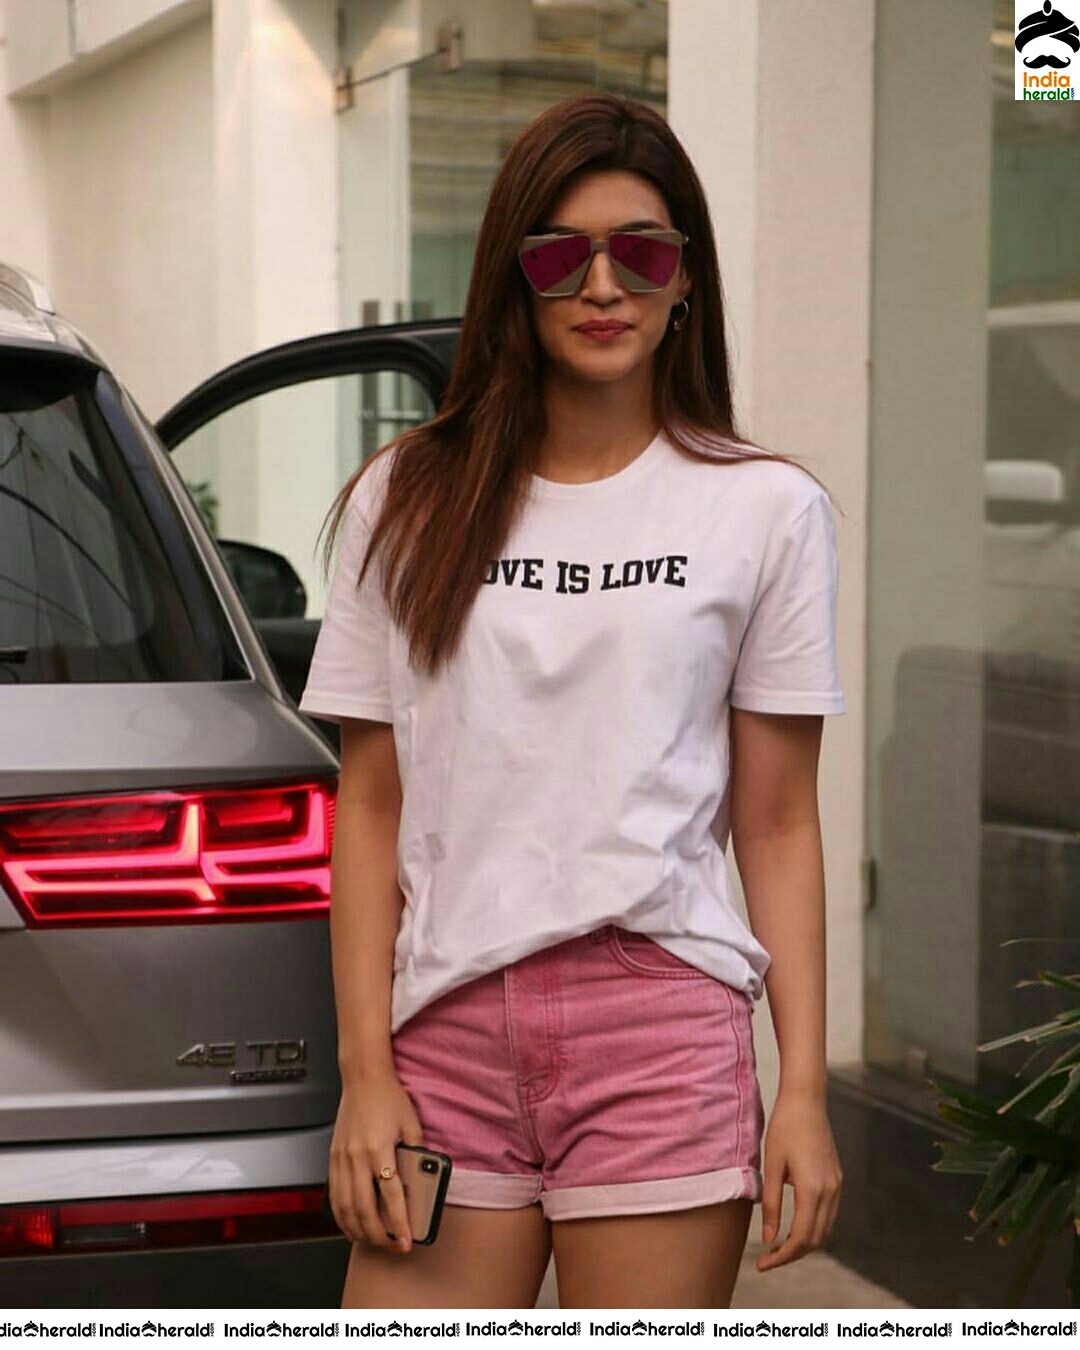 Kriti Sanon Charming In White Colour Top And Pink Colour Shorts